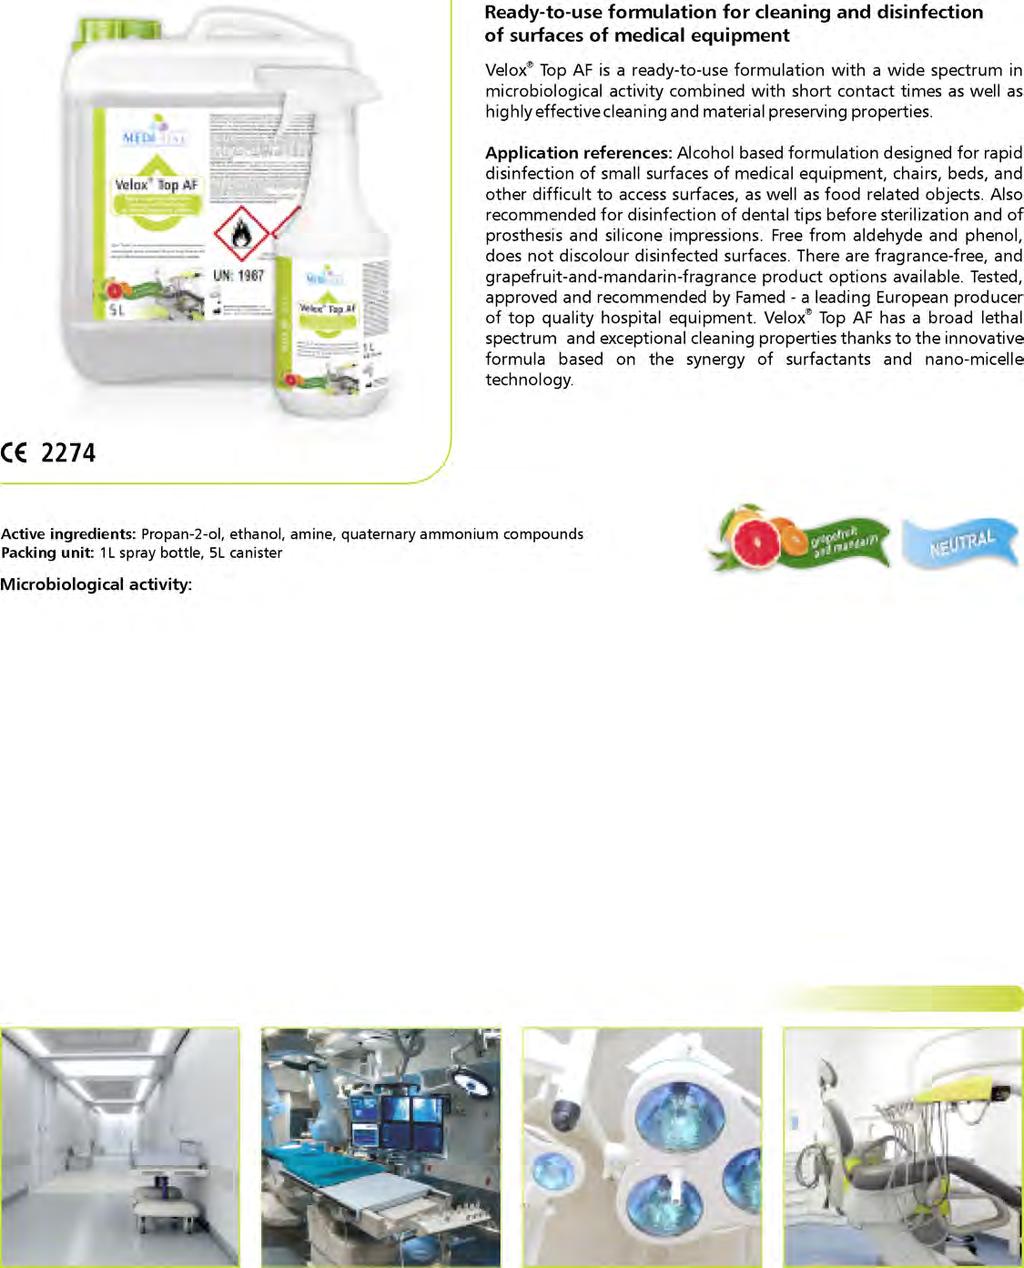 SURFACE DISINFECTION Velox Top AF Ready-to-use formulation for cleaning and disinfection of surfaces of medical equipment Velox Top AF is a ready-to-use formulation with a wide spectrum in